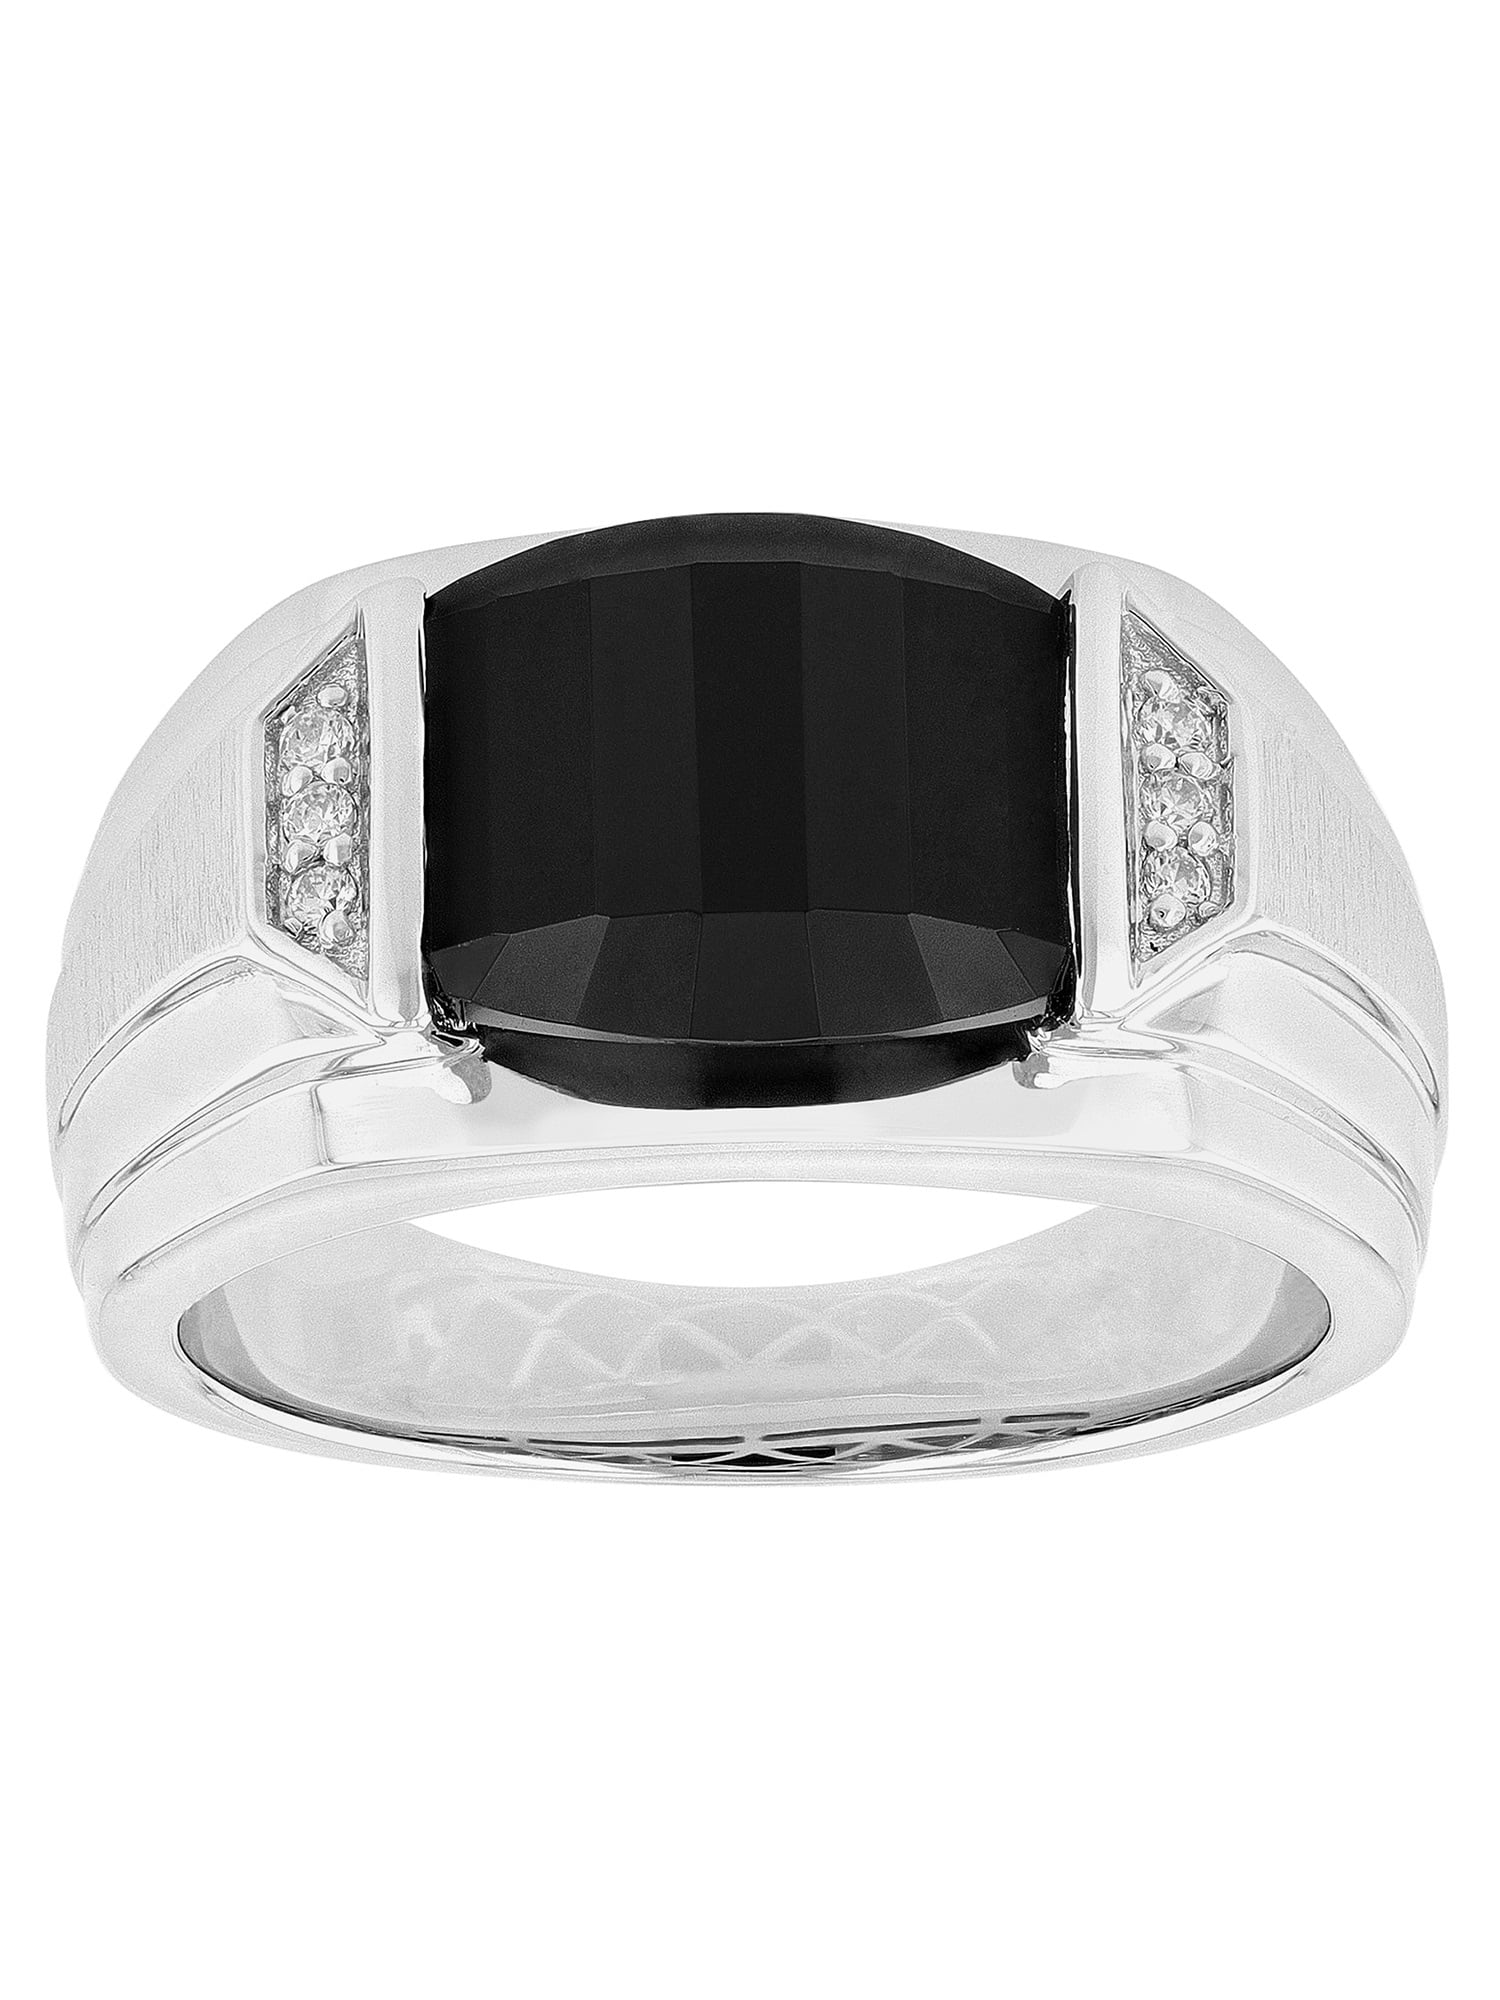 Sociaal Specialiteit bank Men's Black Onyx and Simulated Diamond Ring in .925 Sterling Silver -  Walmart.com